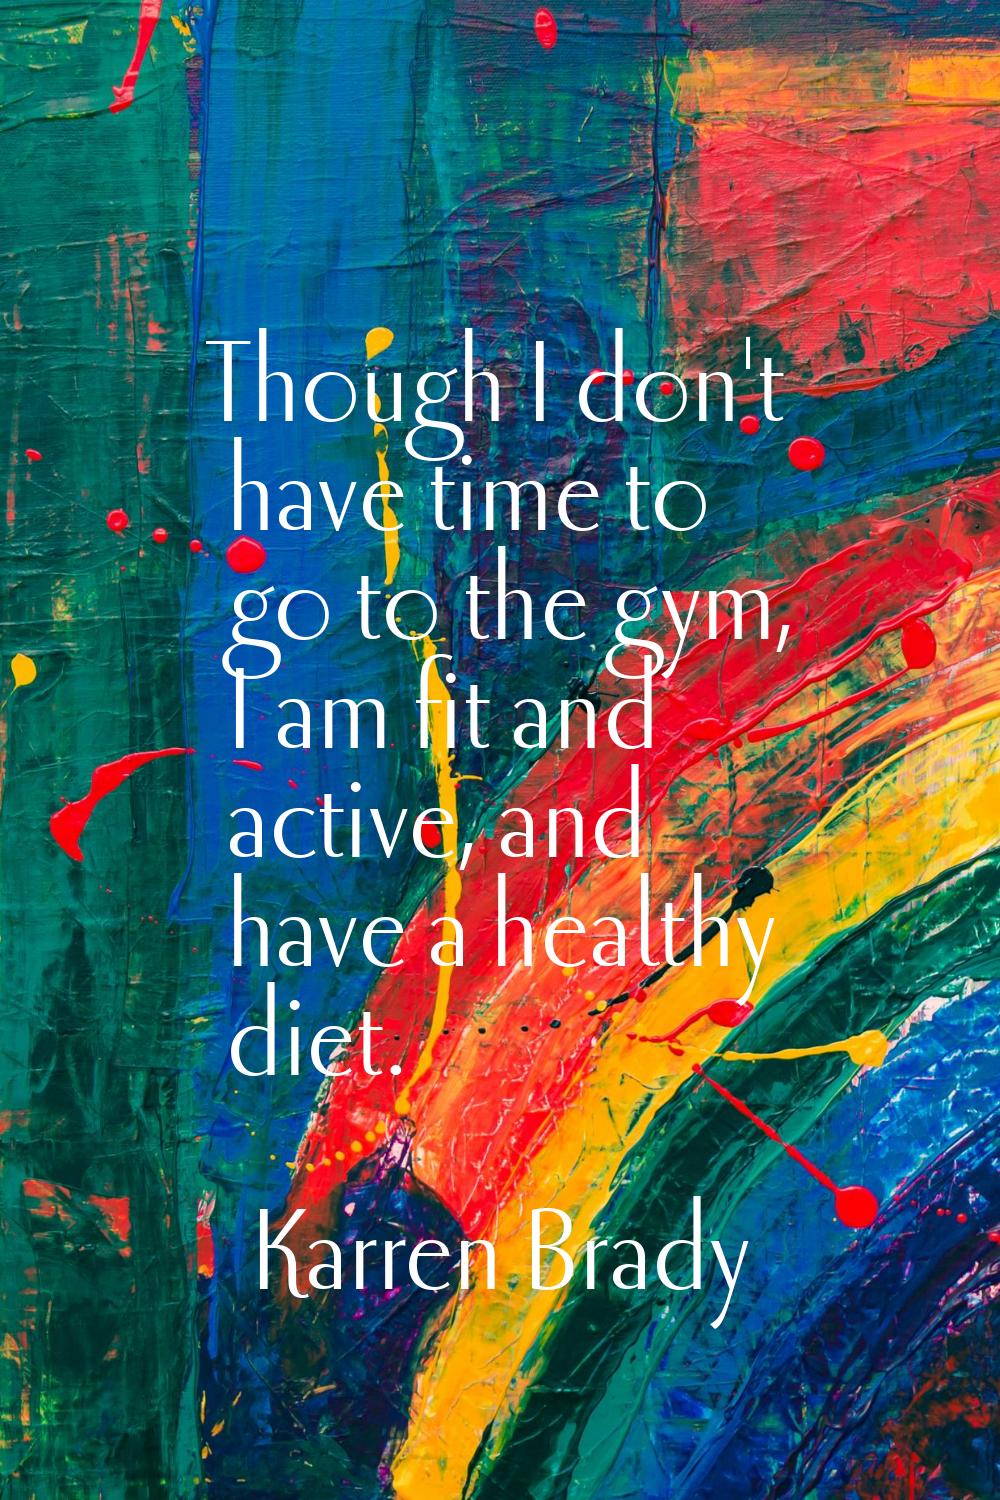 Though I don't have time to go to the gym, I am fit and active, and have a healthy diet.